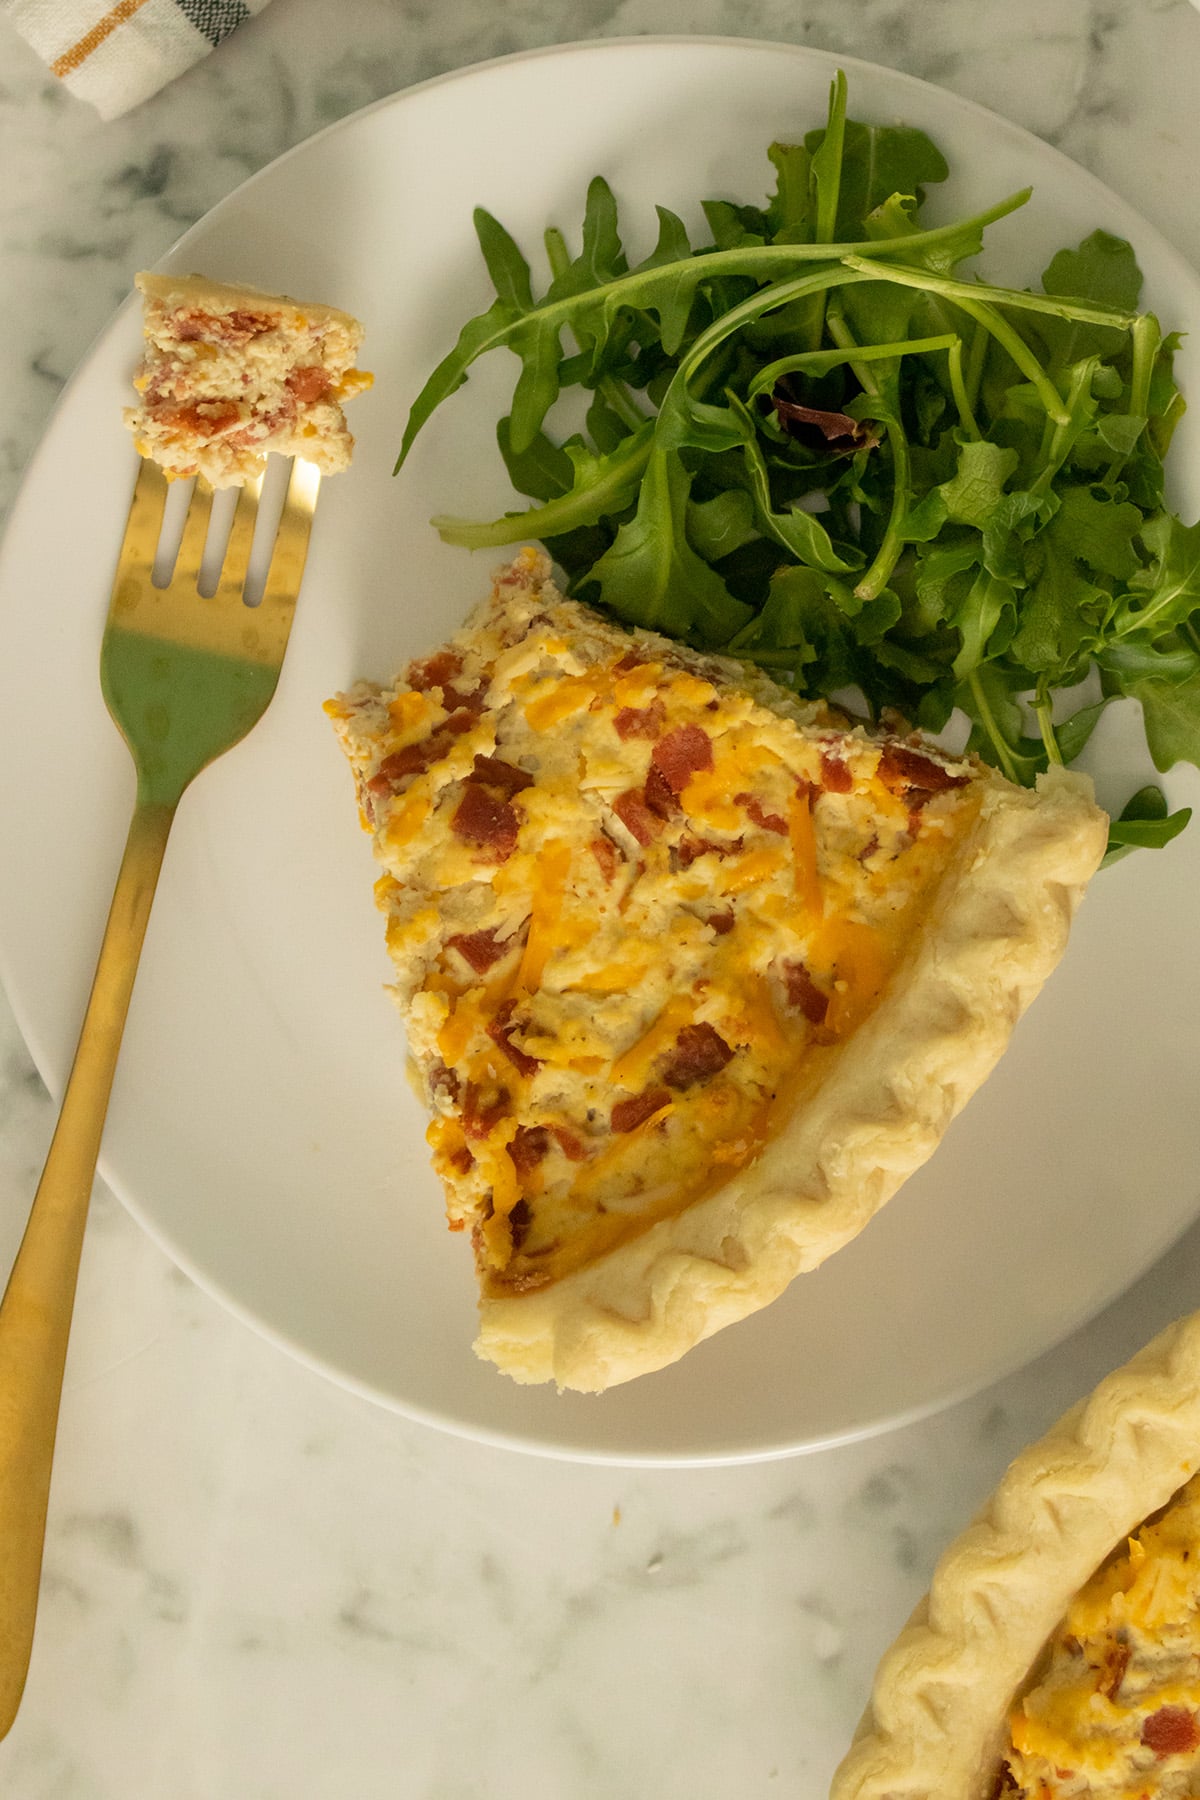 vegan quiche Lorraine on a white plate with a salad. A bite is on a fork.